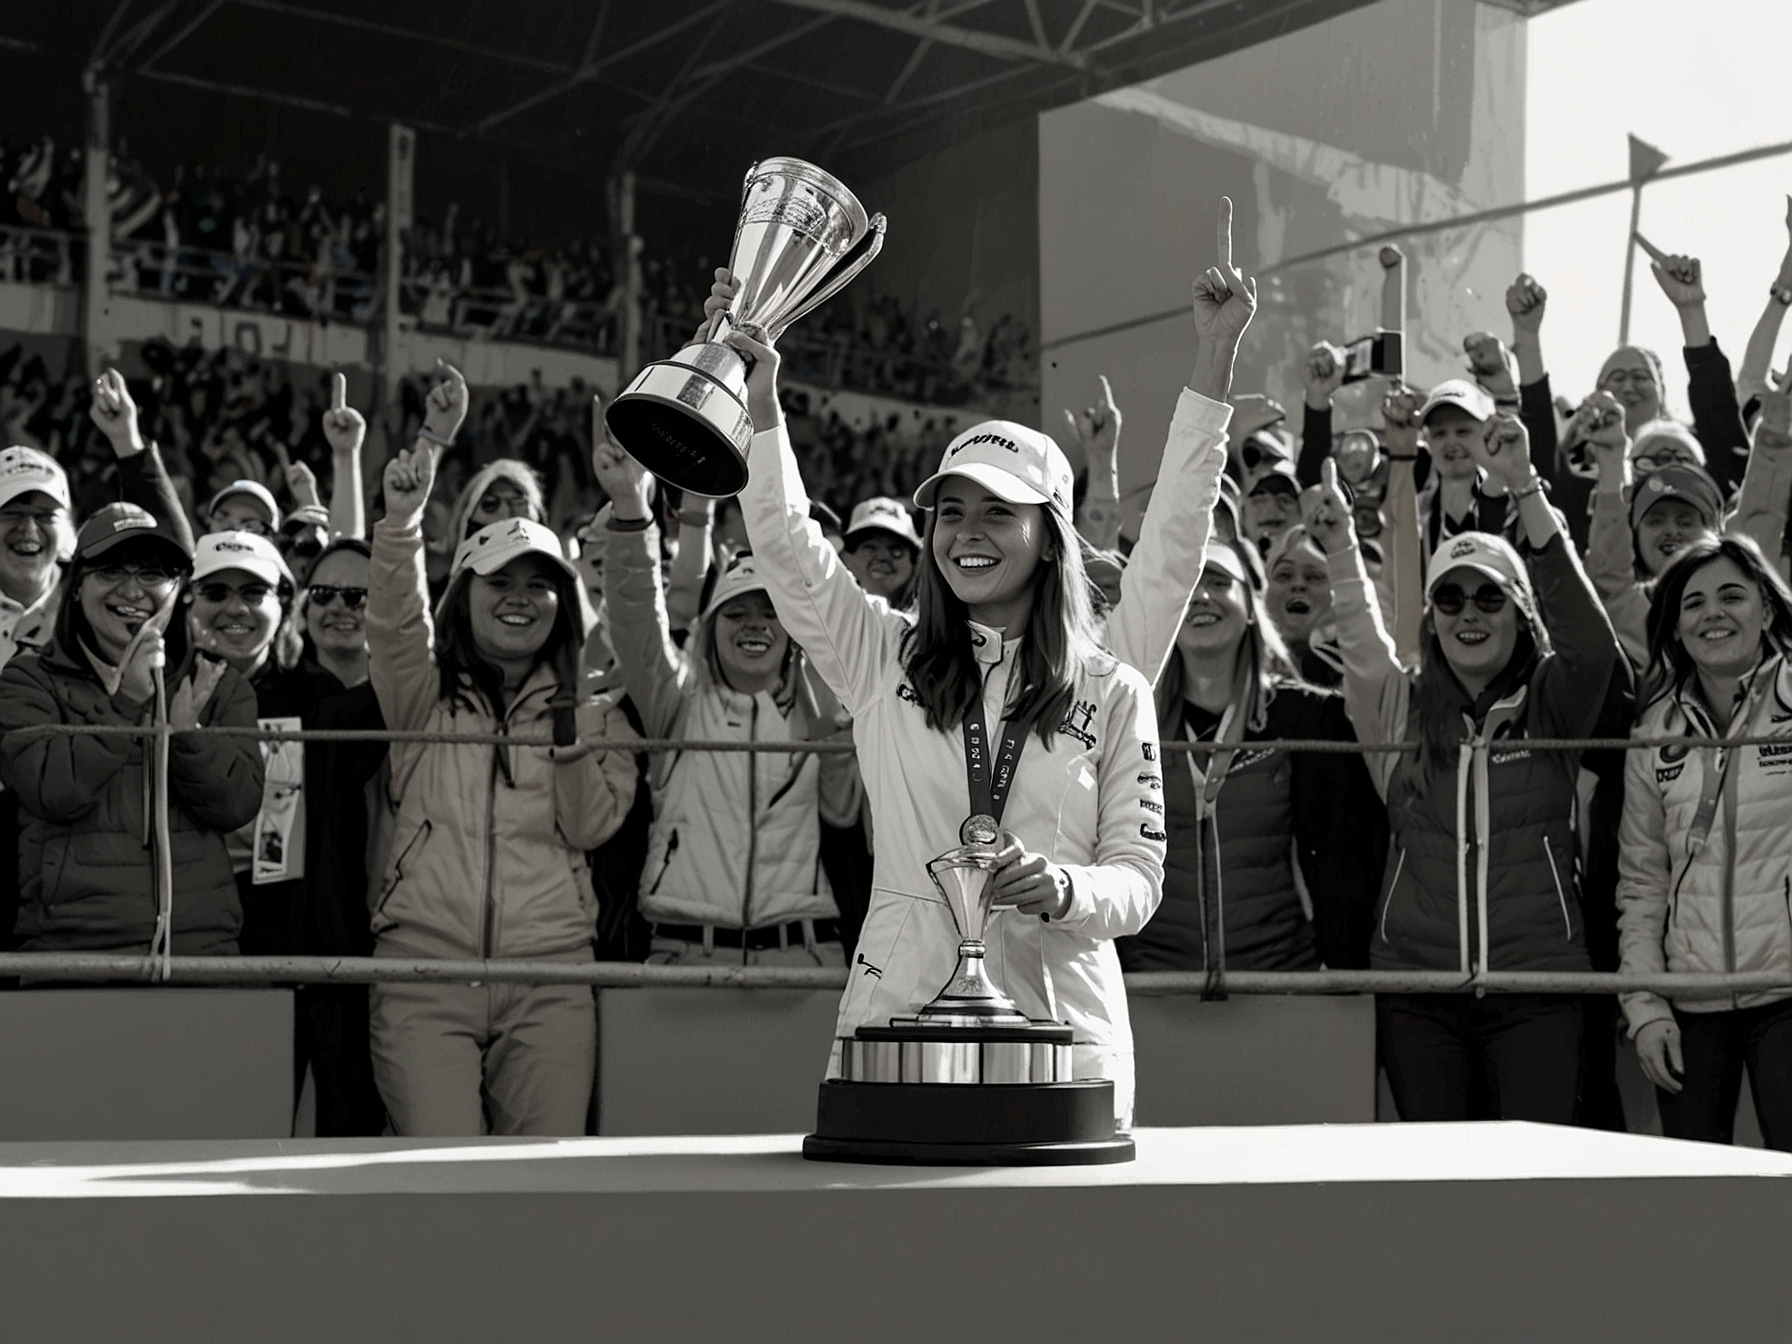 Abbi Pulling celebrates her victory on the podium, holding the first-place trophy amidst cheering fans and fellow competitors, making a significant mark for women in motorsport.